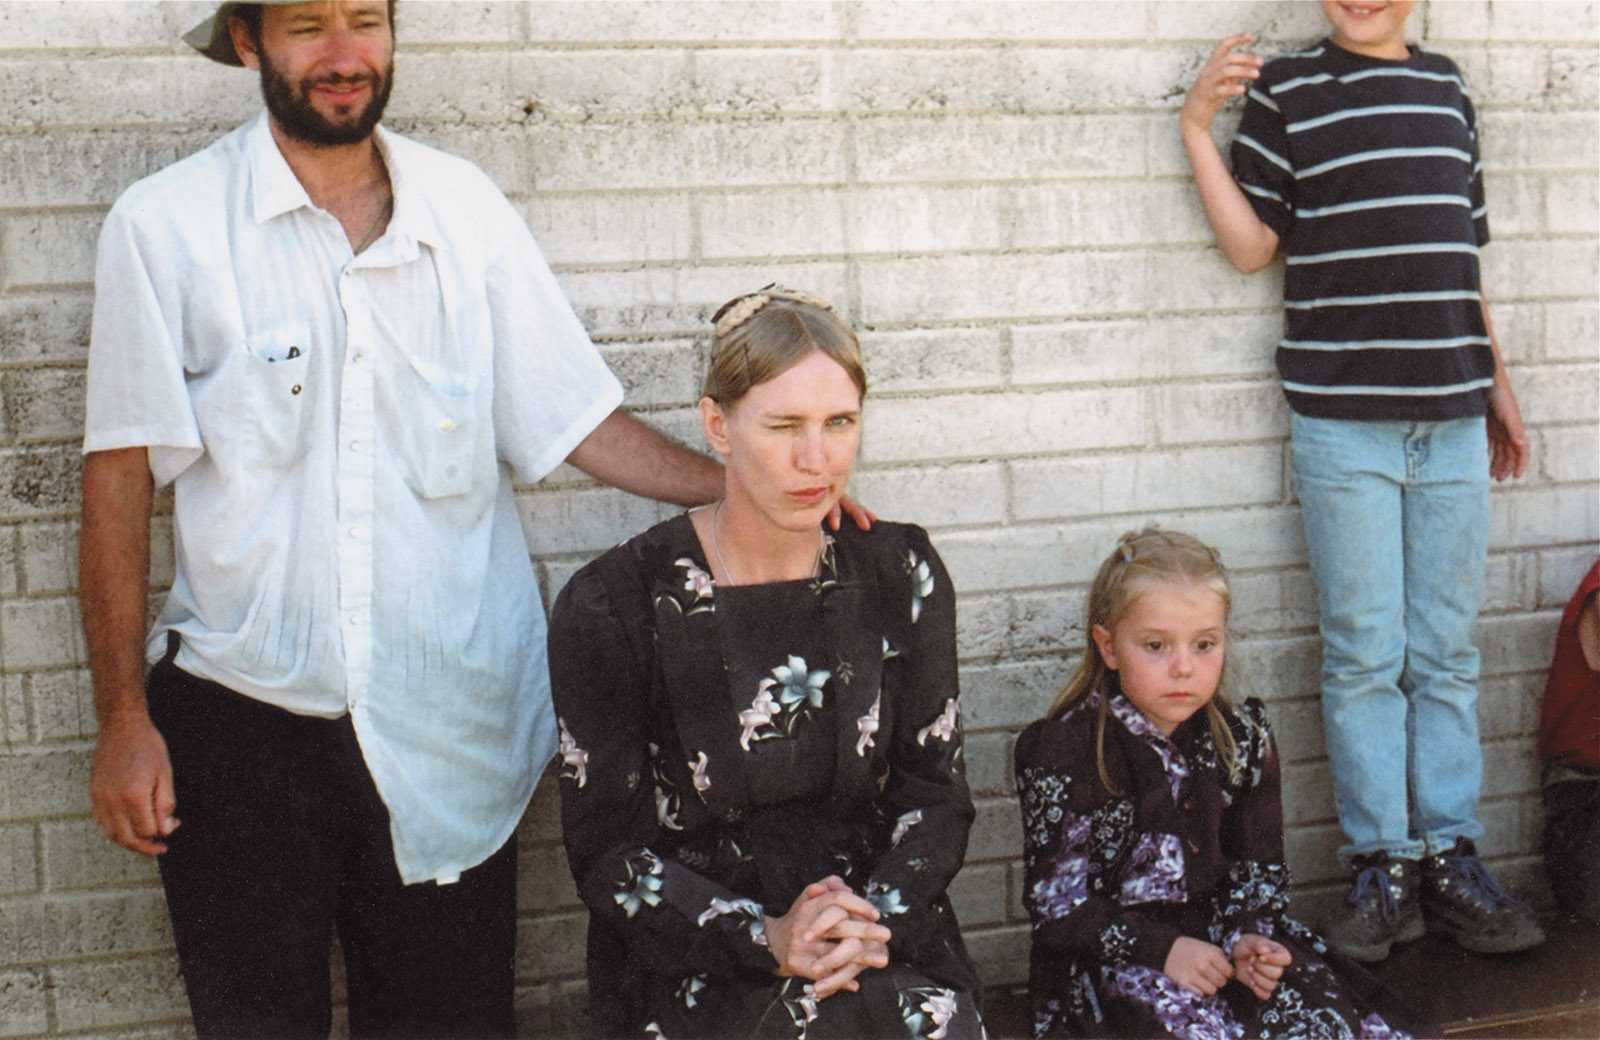 Miriam Toews in costume as the character Esther during the filming of Silent Light set in a Mennonite settlement in Chihuahua, Mexico, July 2006